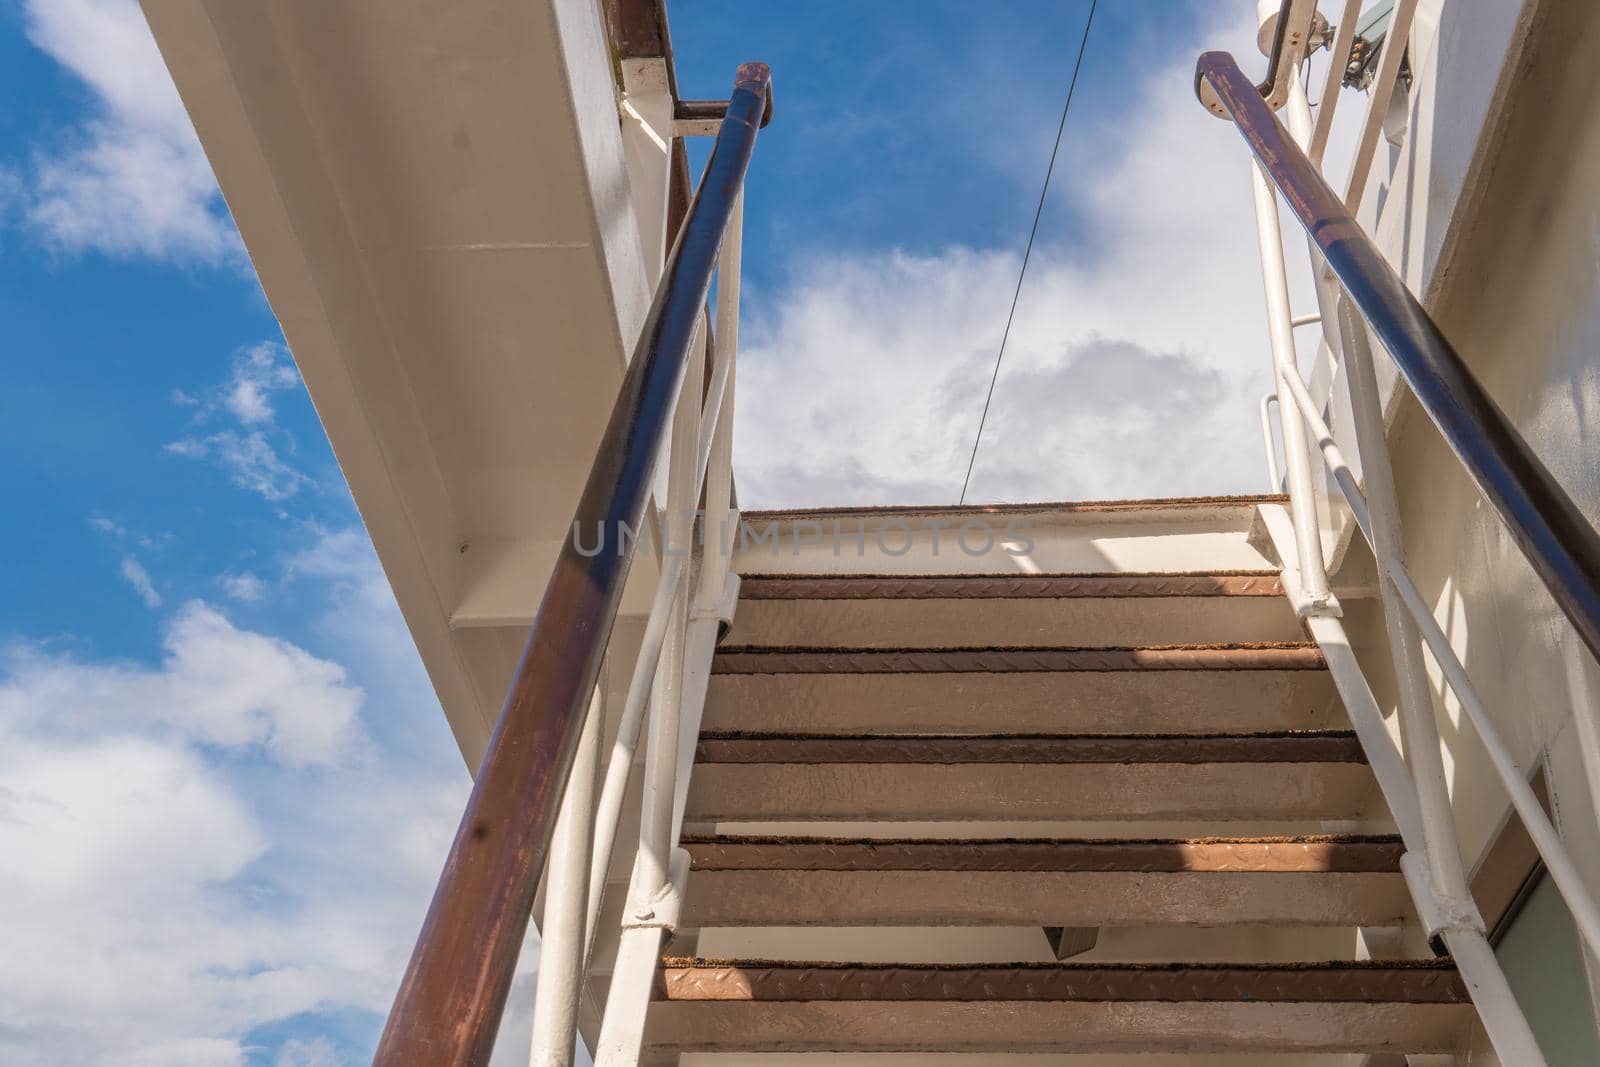 stairs on deck sailing relaxing, holiday leisure transportation vessel friends, lifestyle sitting. Bow shipboard cabin, hip tourists seascape cruise liner lifeboat lower deck drone view of the sky by 89167702191